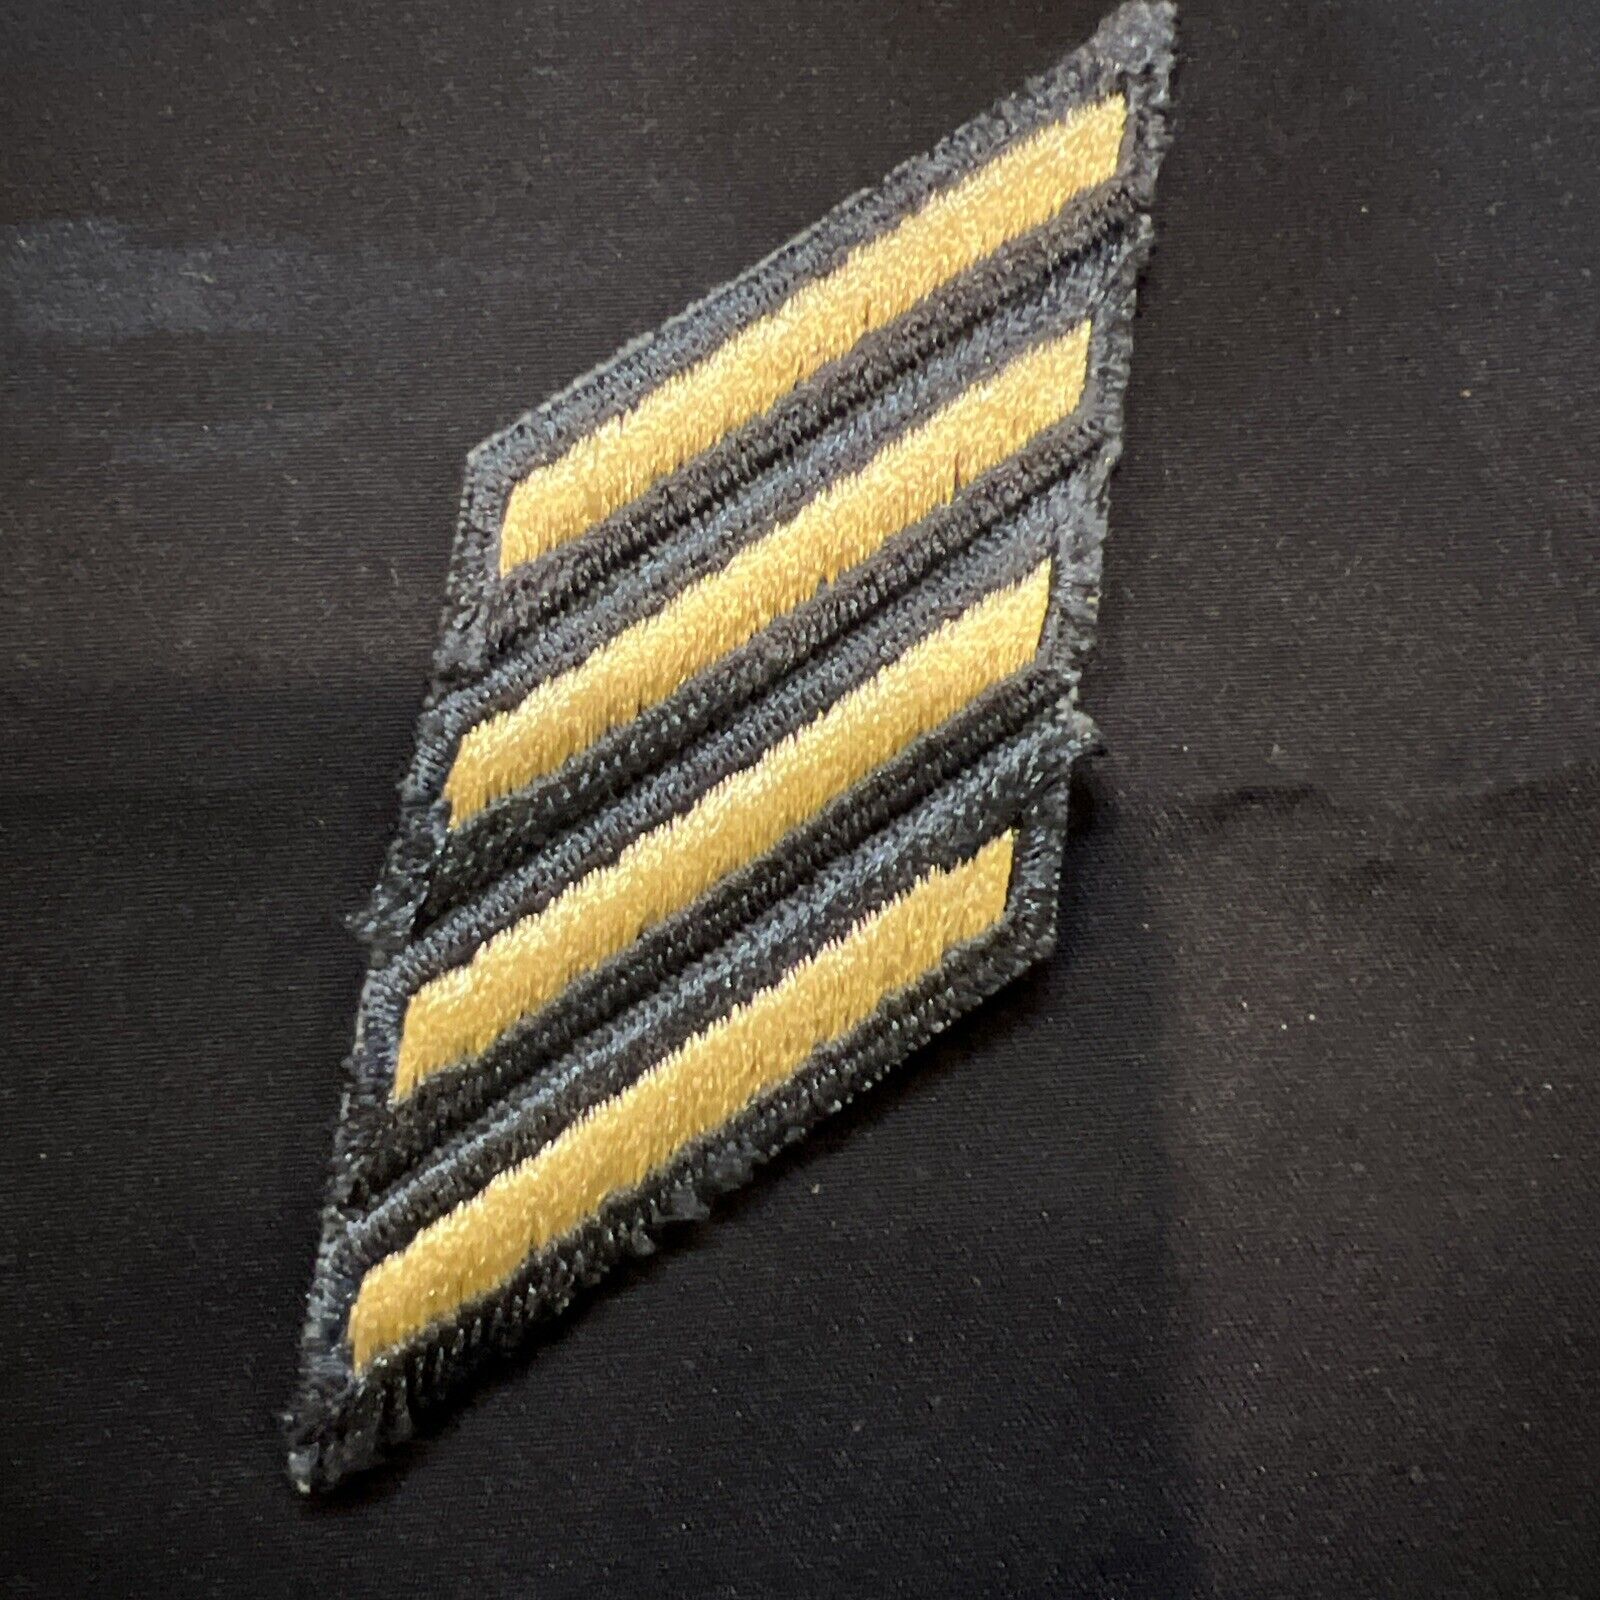 United States Army 12 Years of Service Bars Stripes Patch Tab Badge 4 Hash Marks